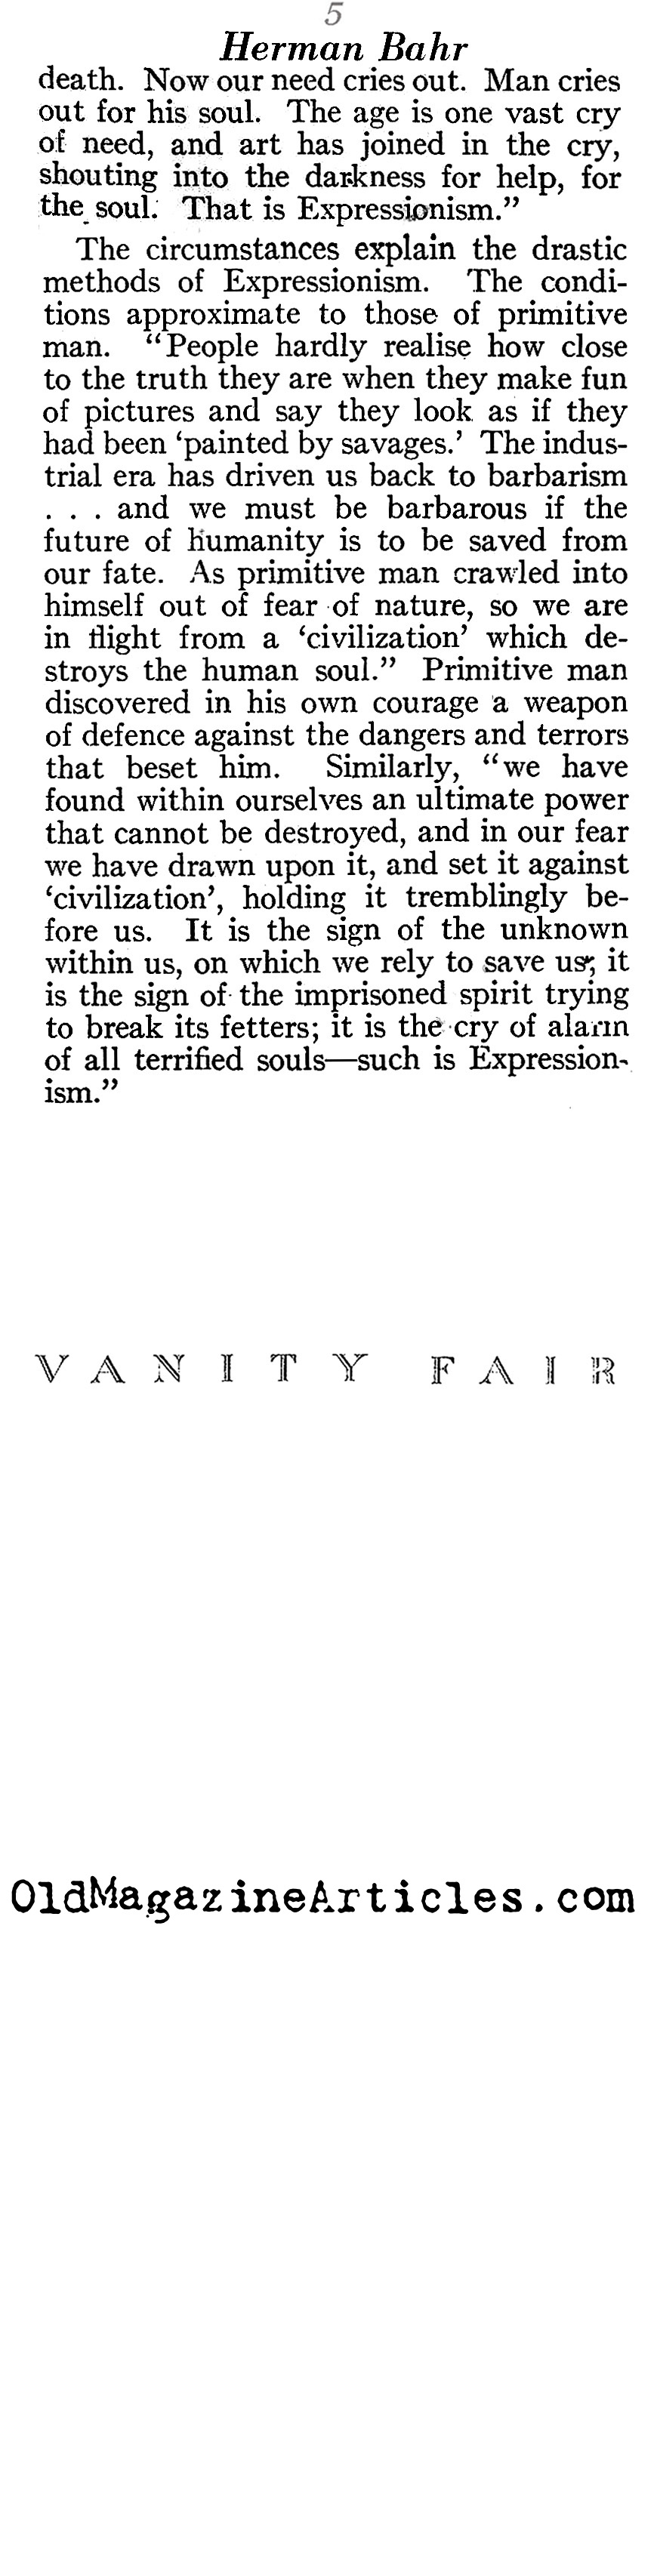 Expressionism as Theory (Vanity Fair Magazine, 1923)